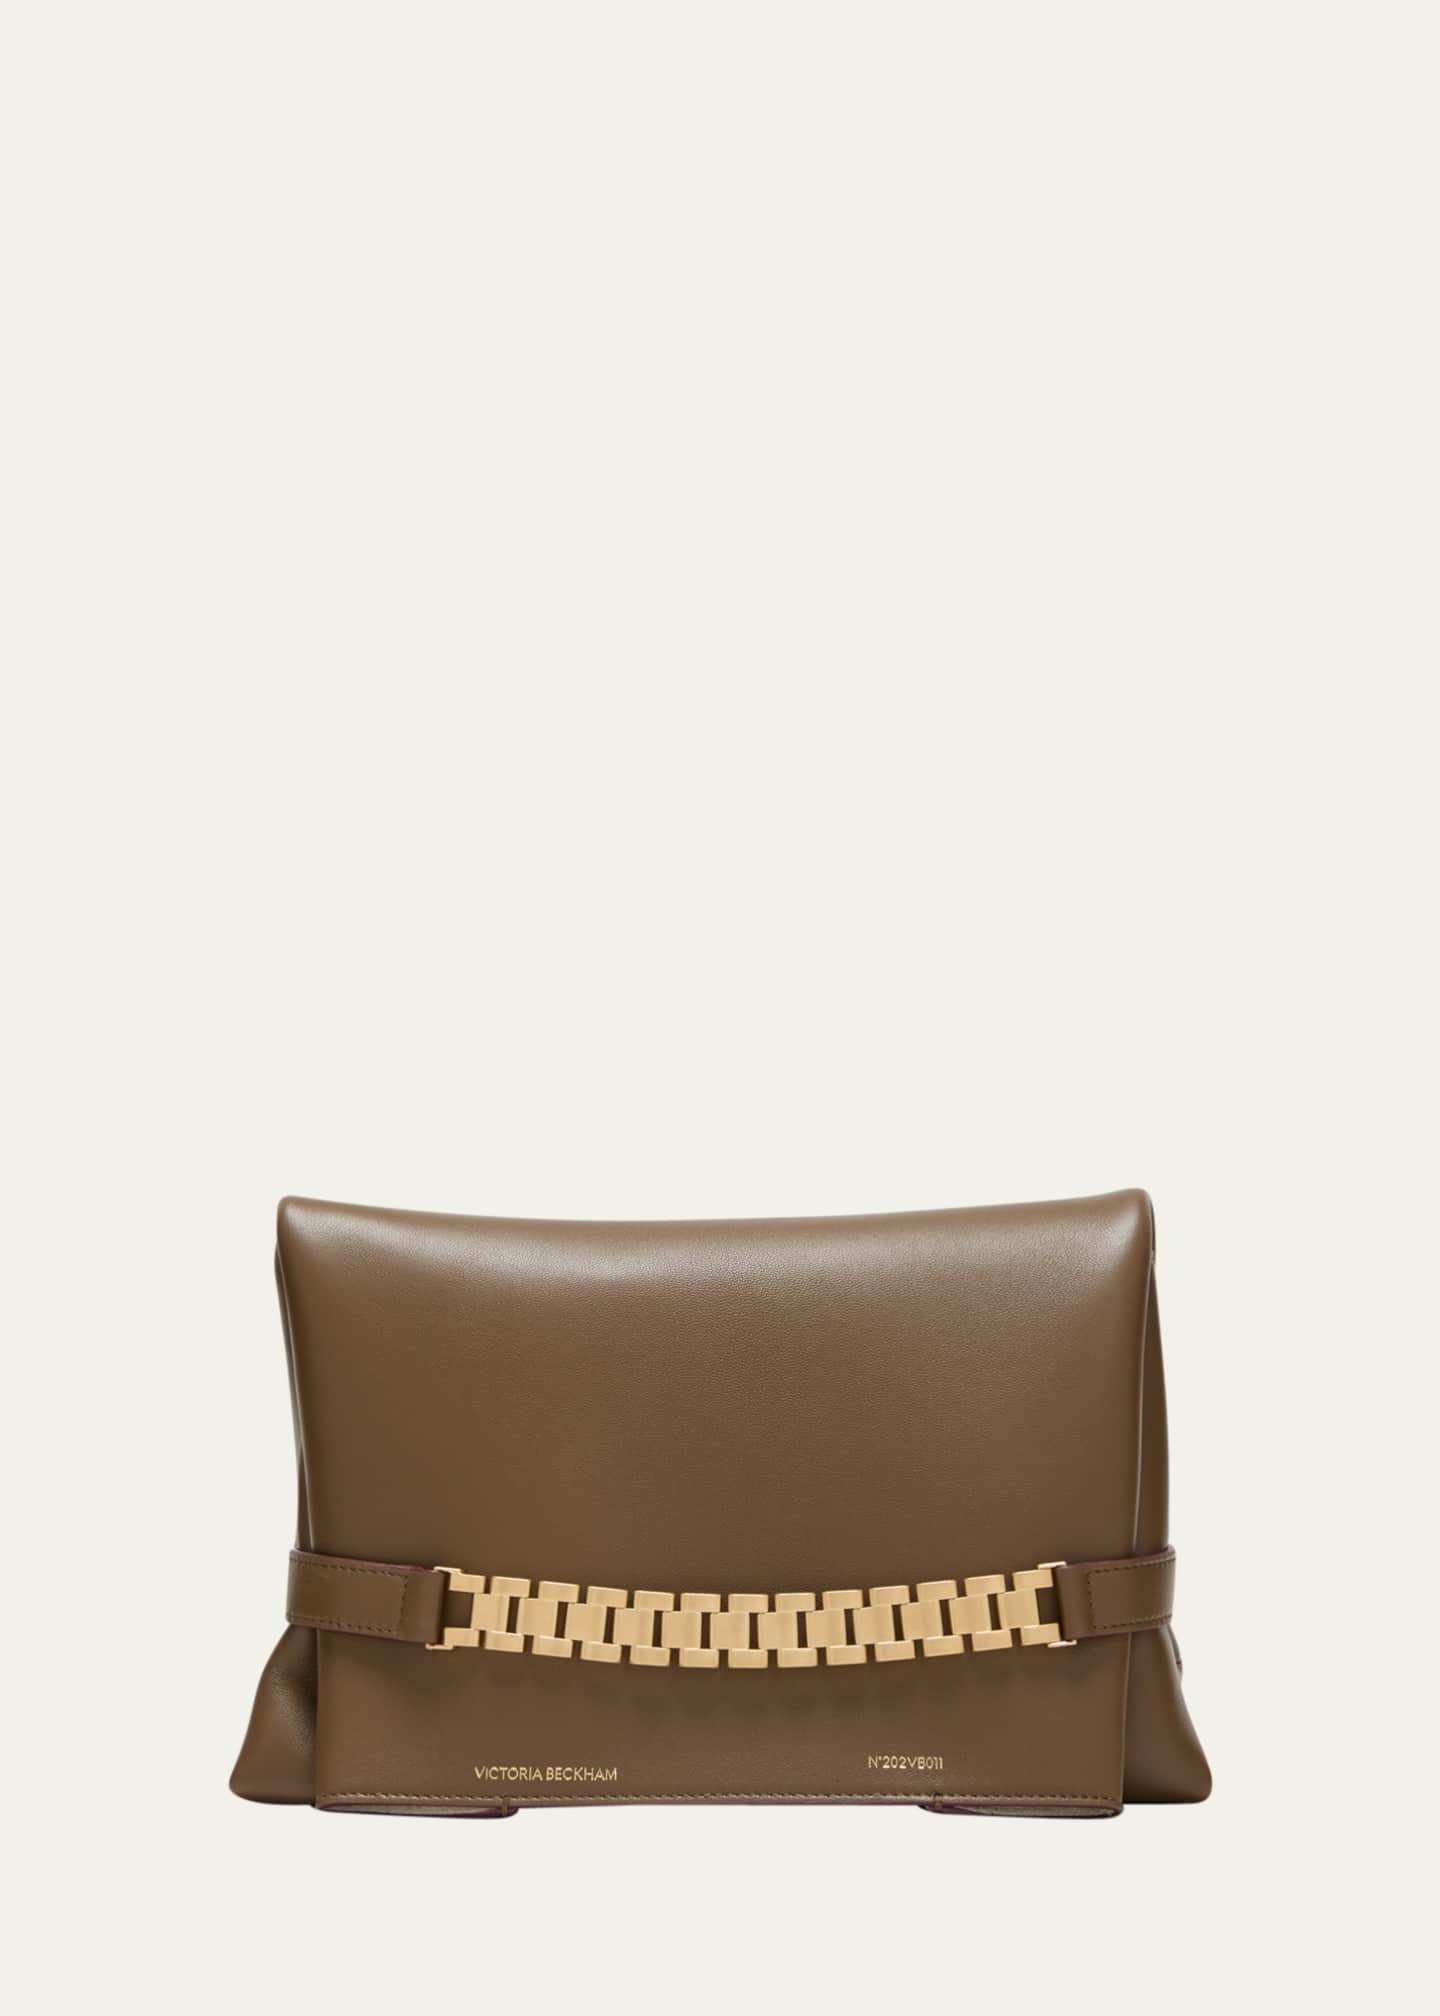 Pouch leather clutch bag